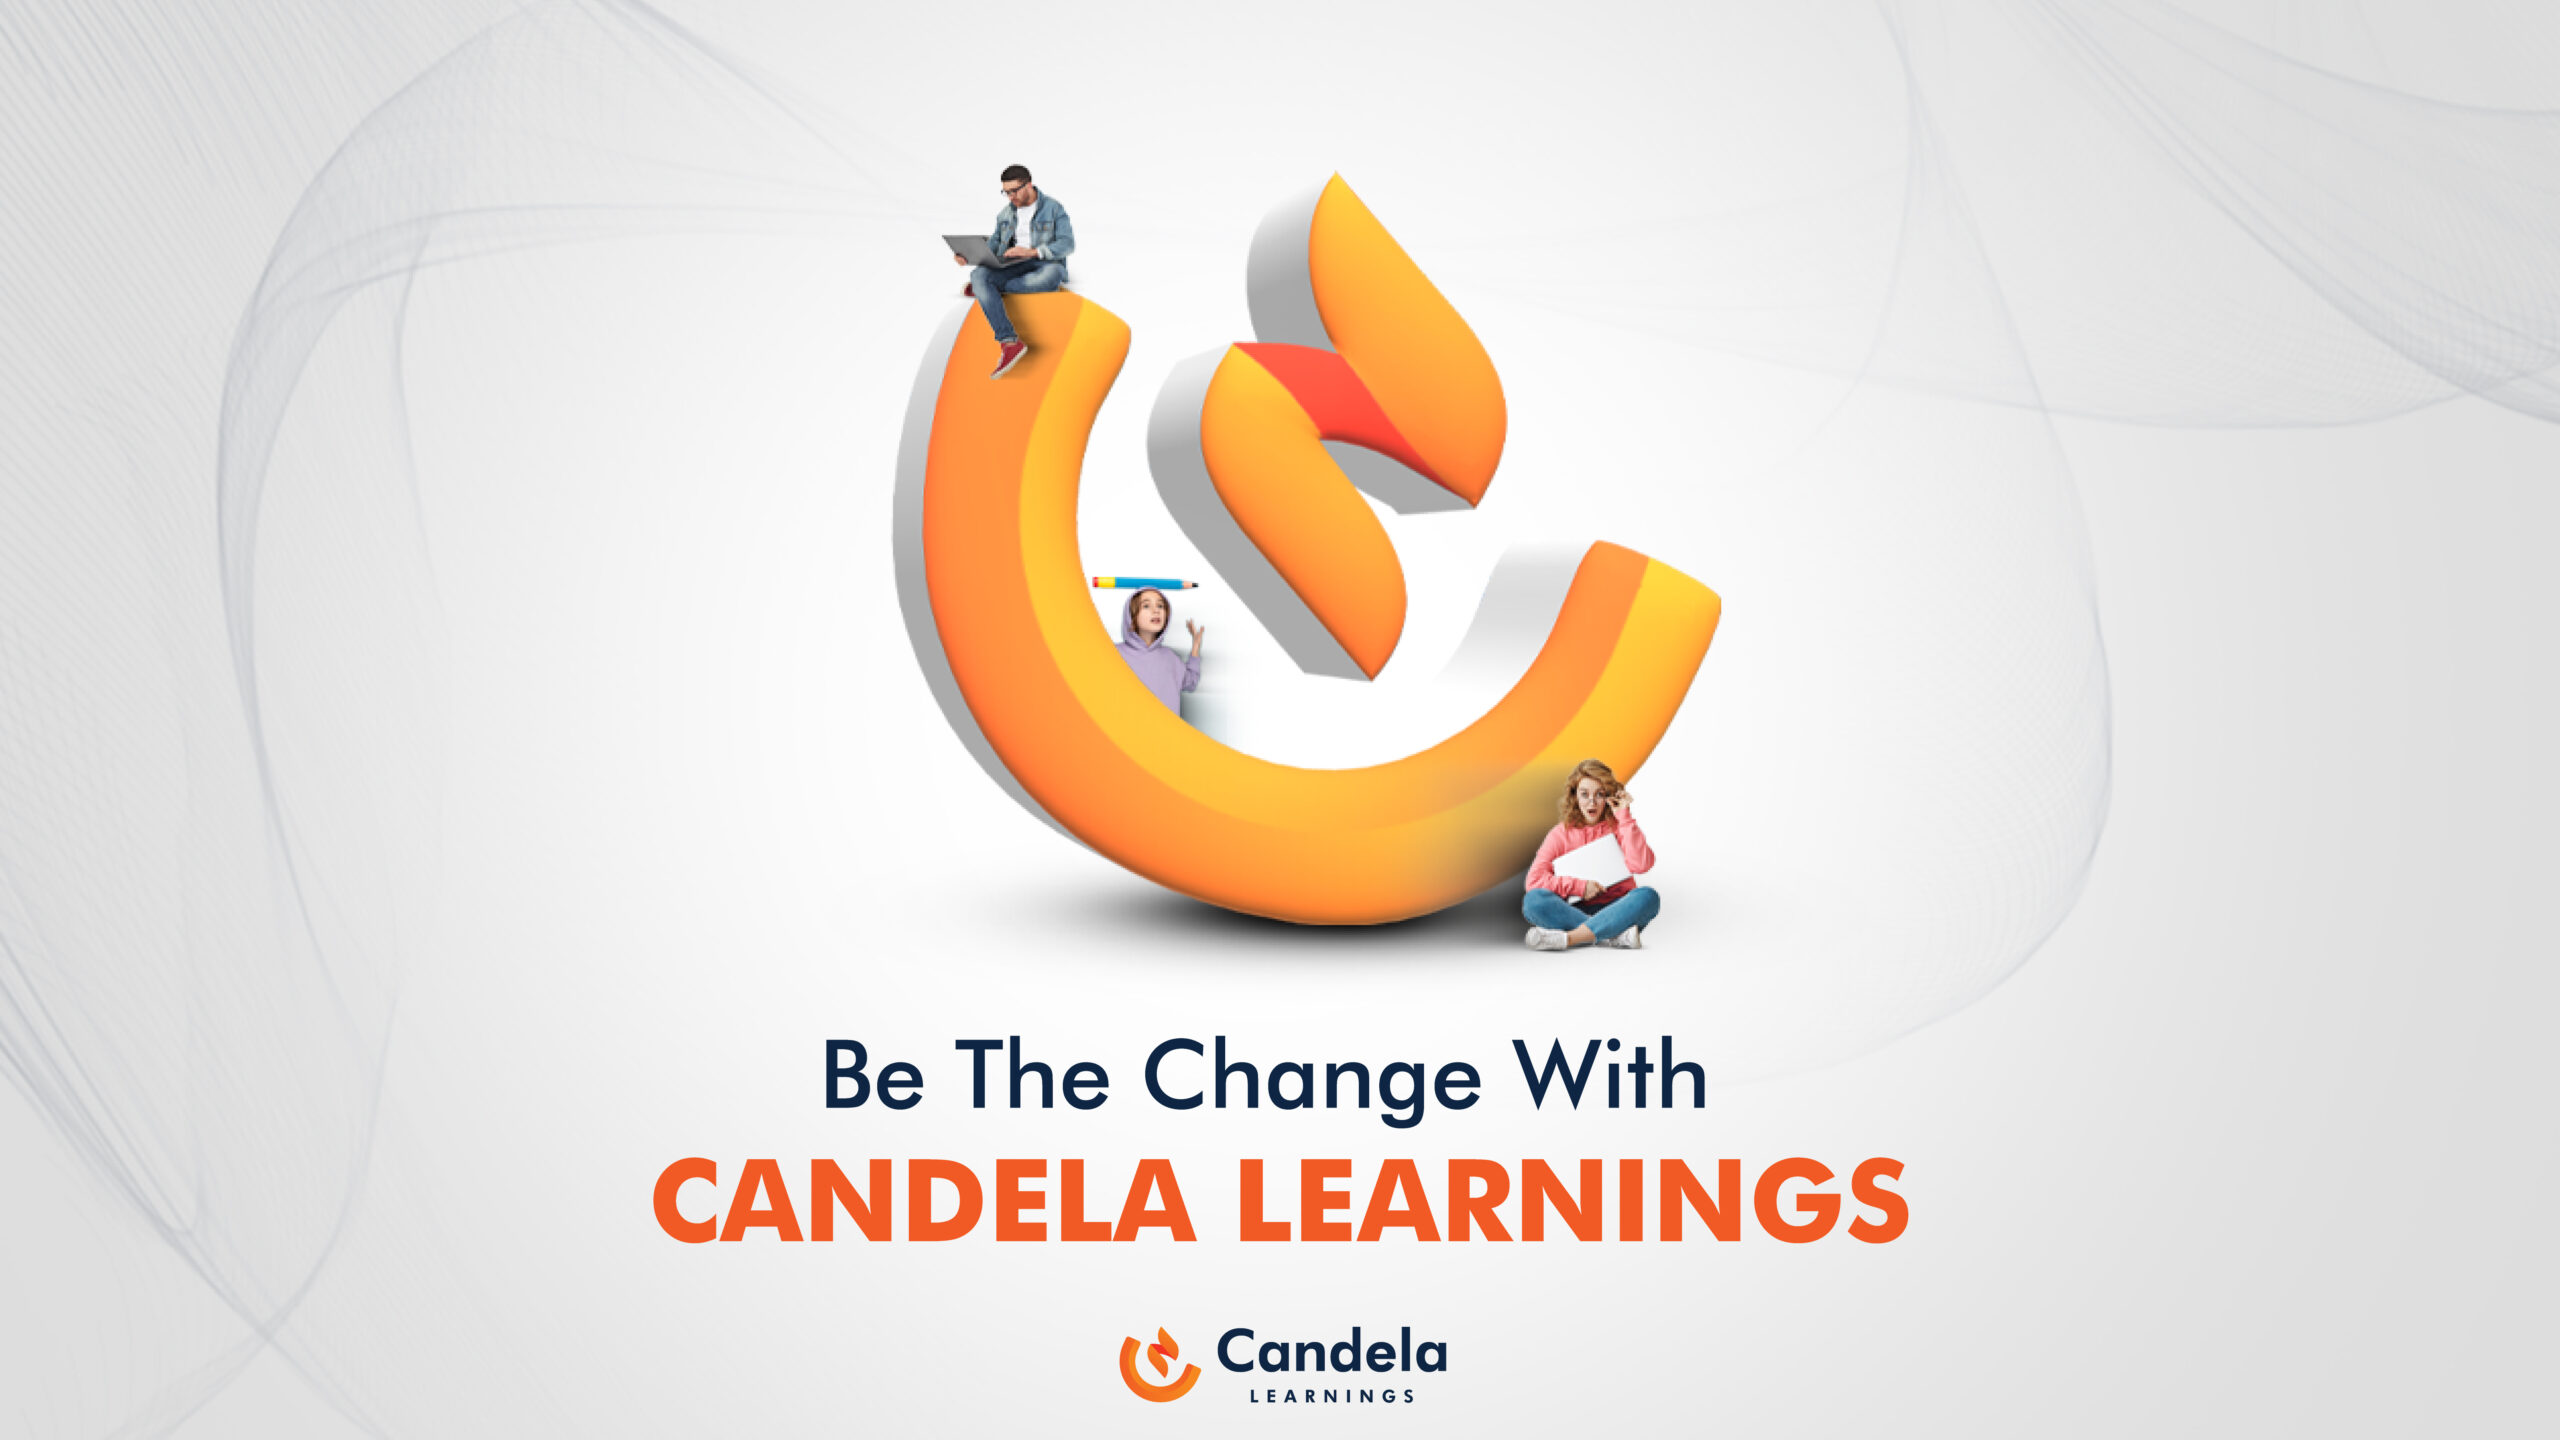 Be the change with candela learnings